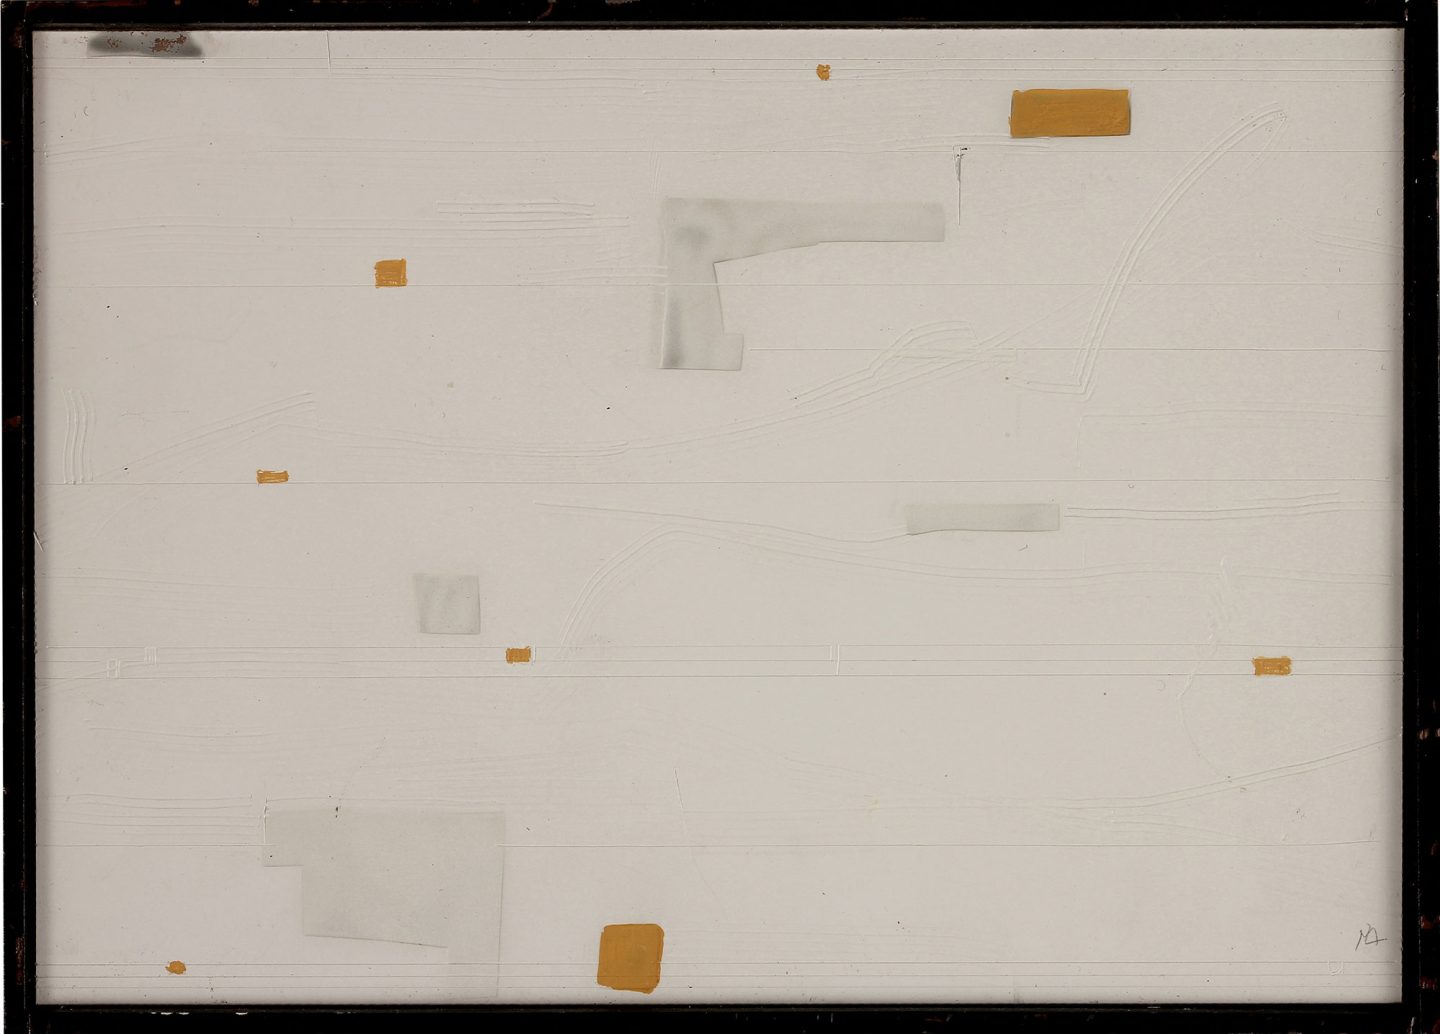 Lambrechts Fragments in White IV